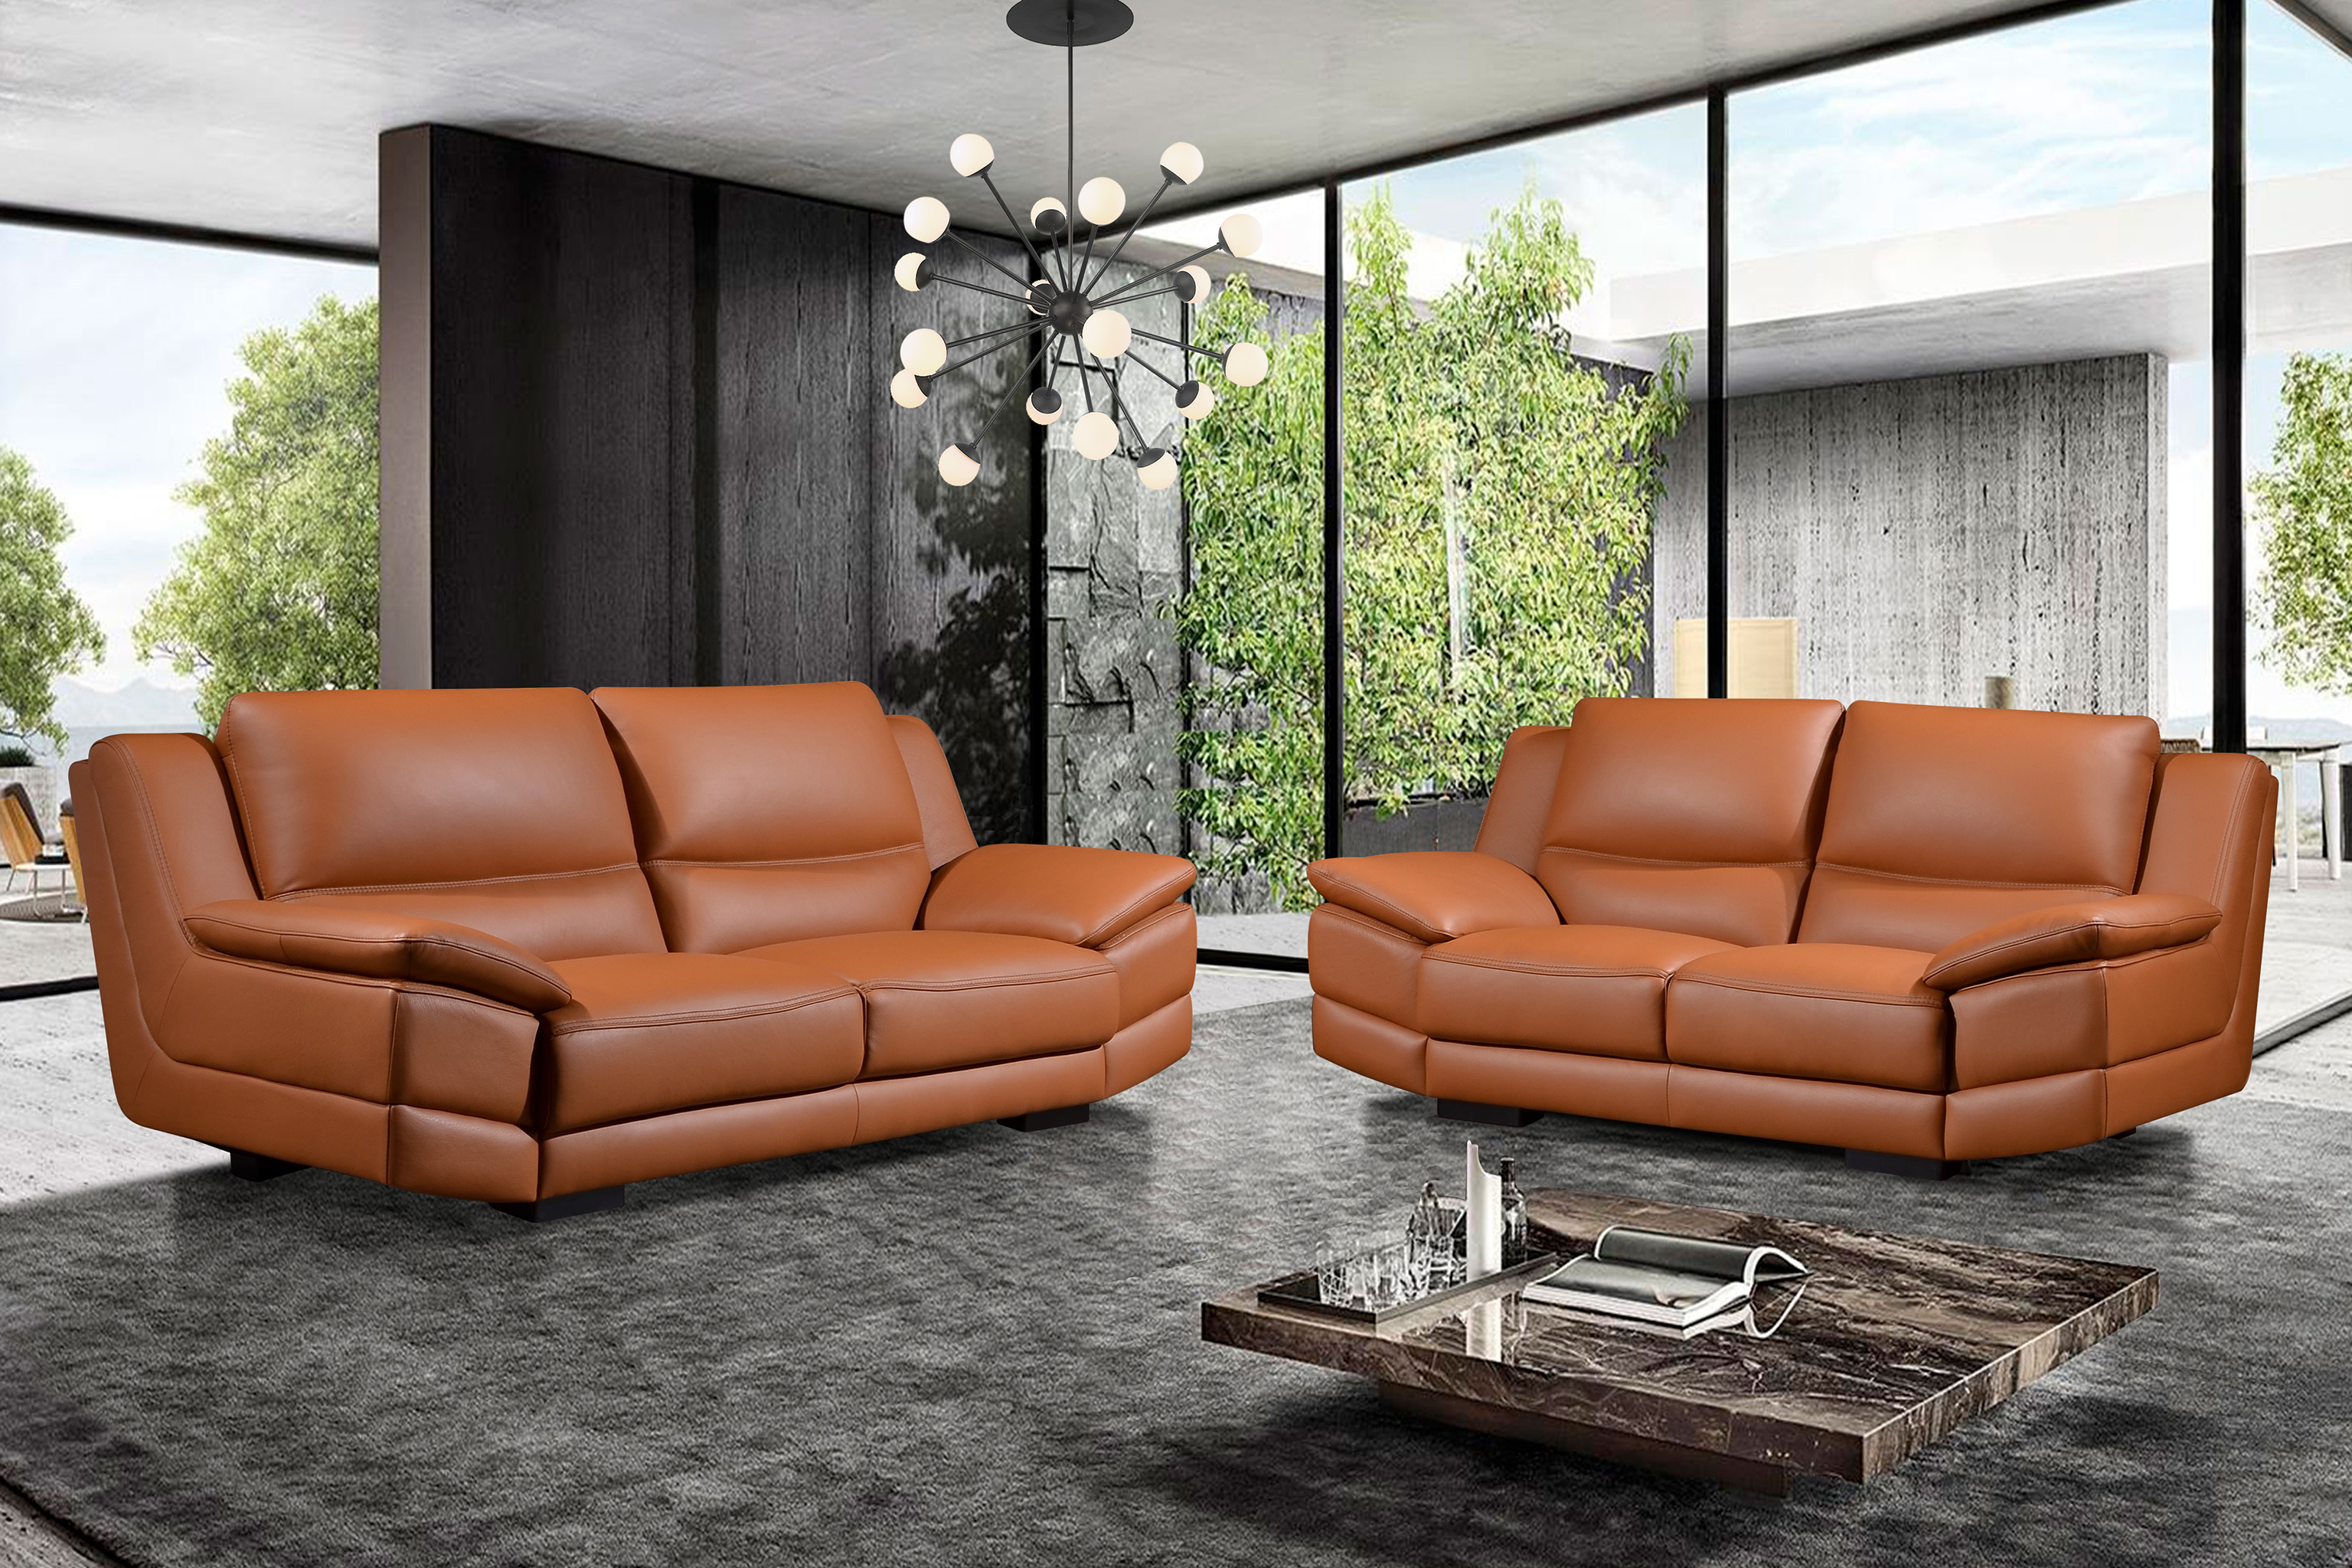 PALOMA 2.5 Seater Sofa in Leather by Castilla